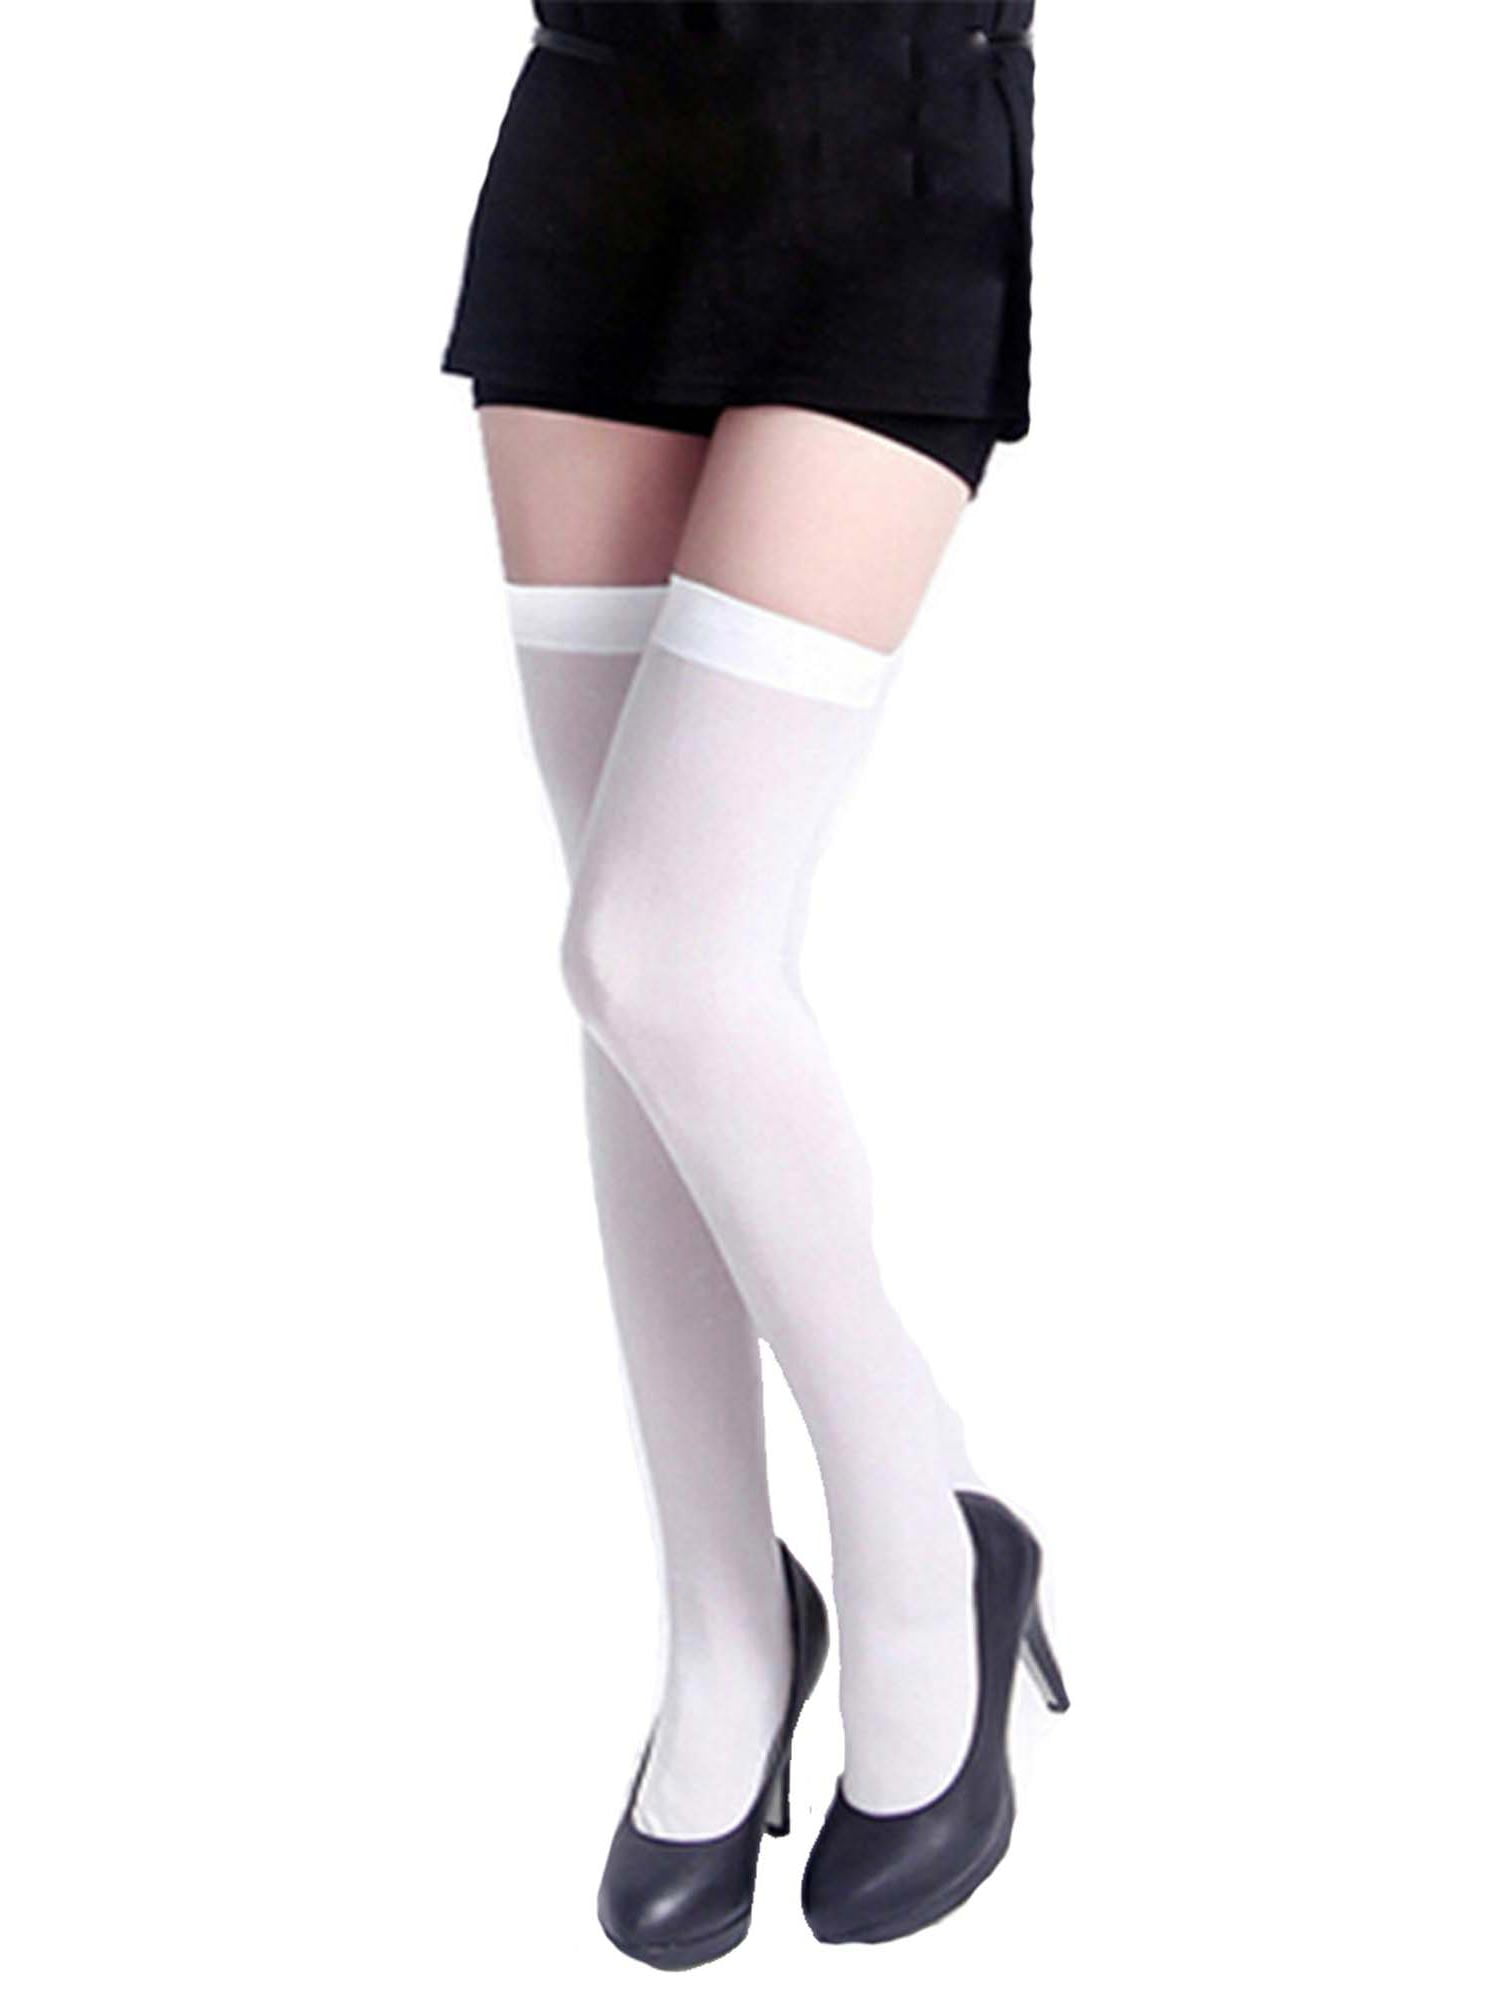 anklageren plantageejer Handel Angelique Women's Full Figure Plus Size Nylon Opaque Thigh High Stockings  Tights - Walmart.com